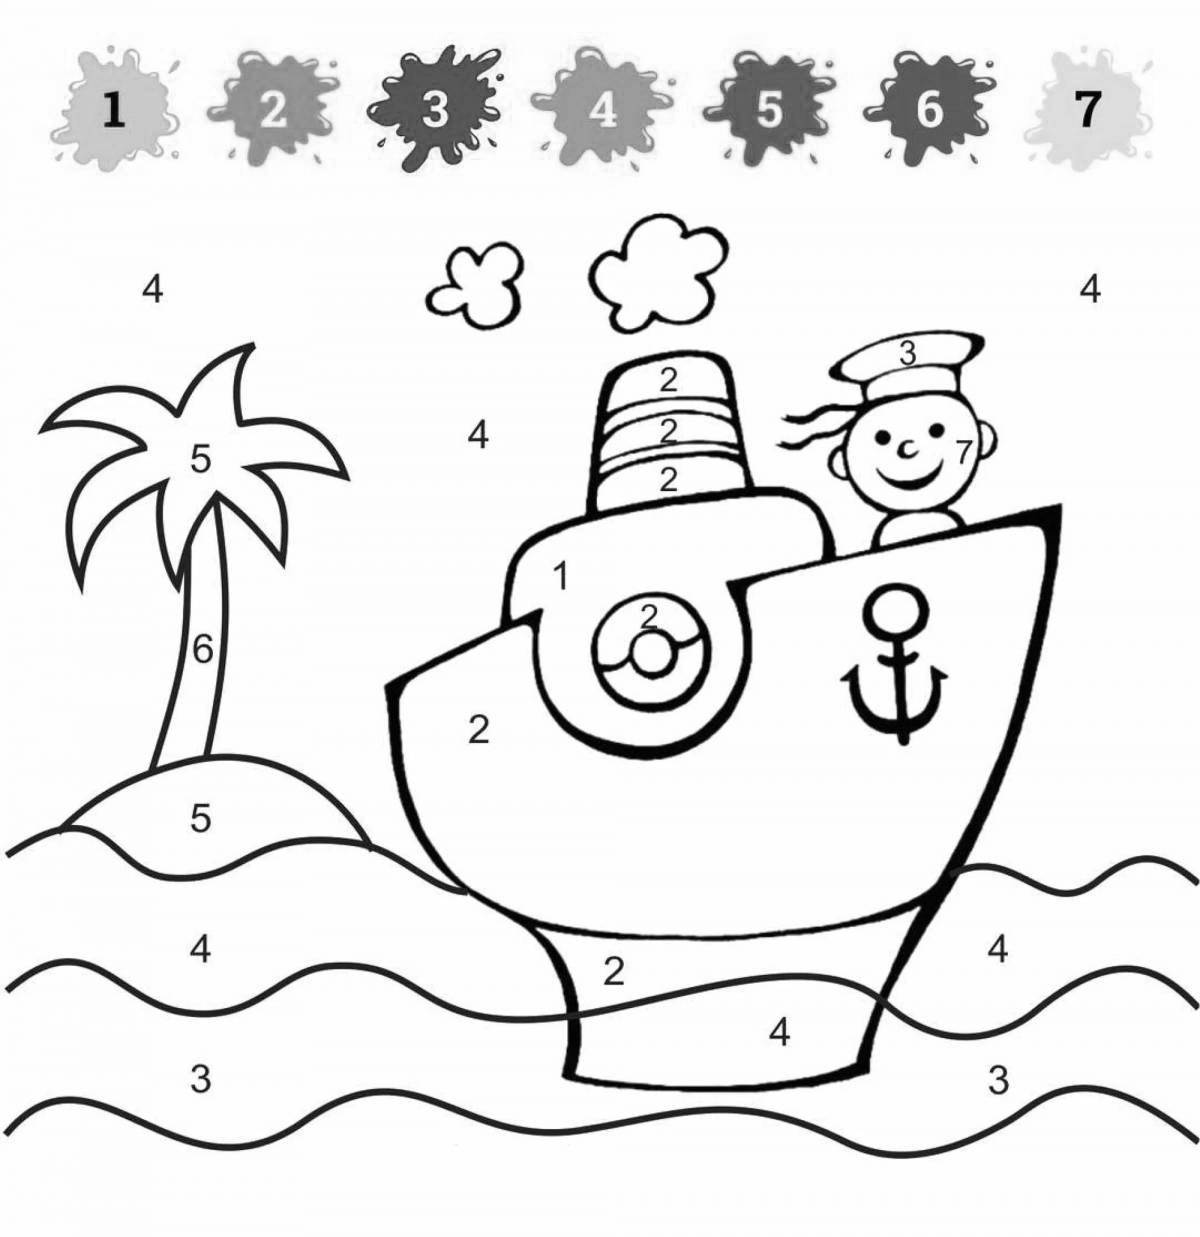 Coloring nice ship by numbers